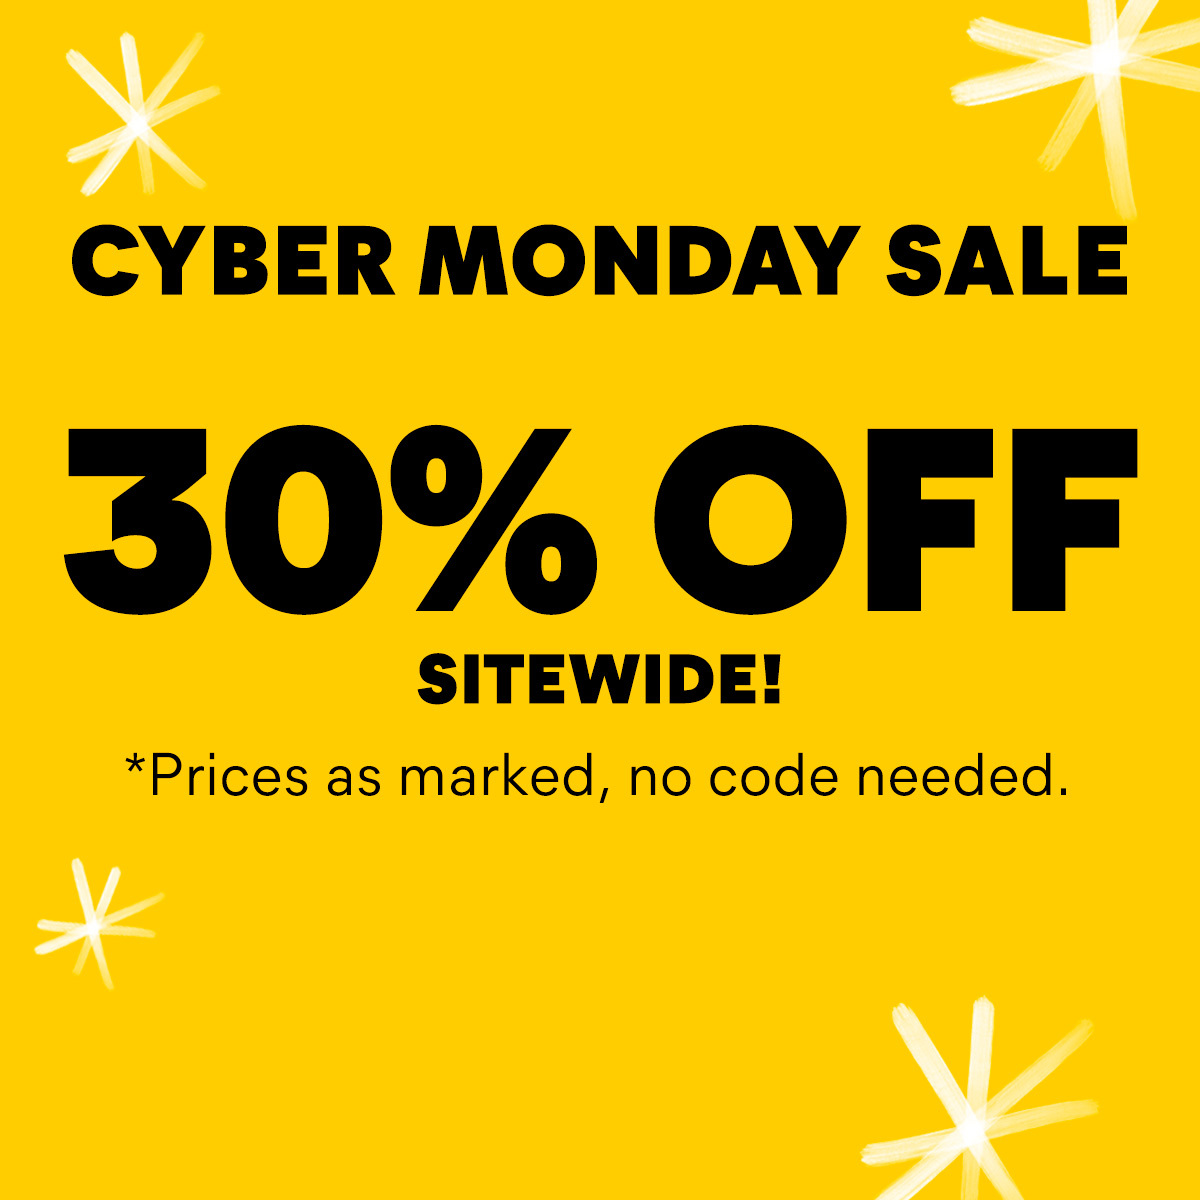 Cyber Monday Sale. 30% off sitewide! Prices as marked, no code needed.